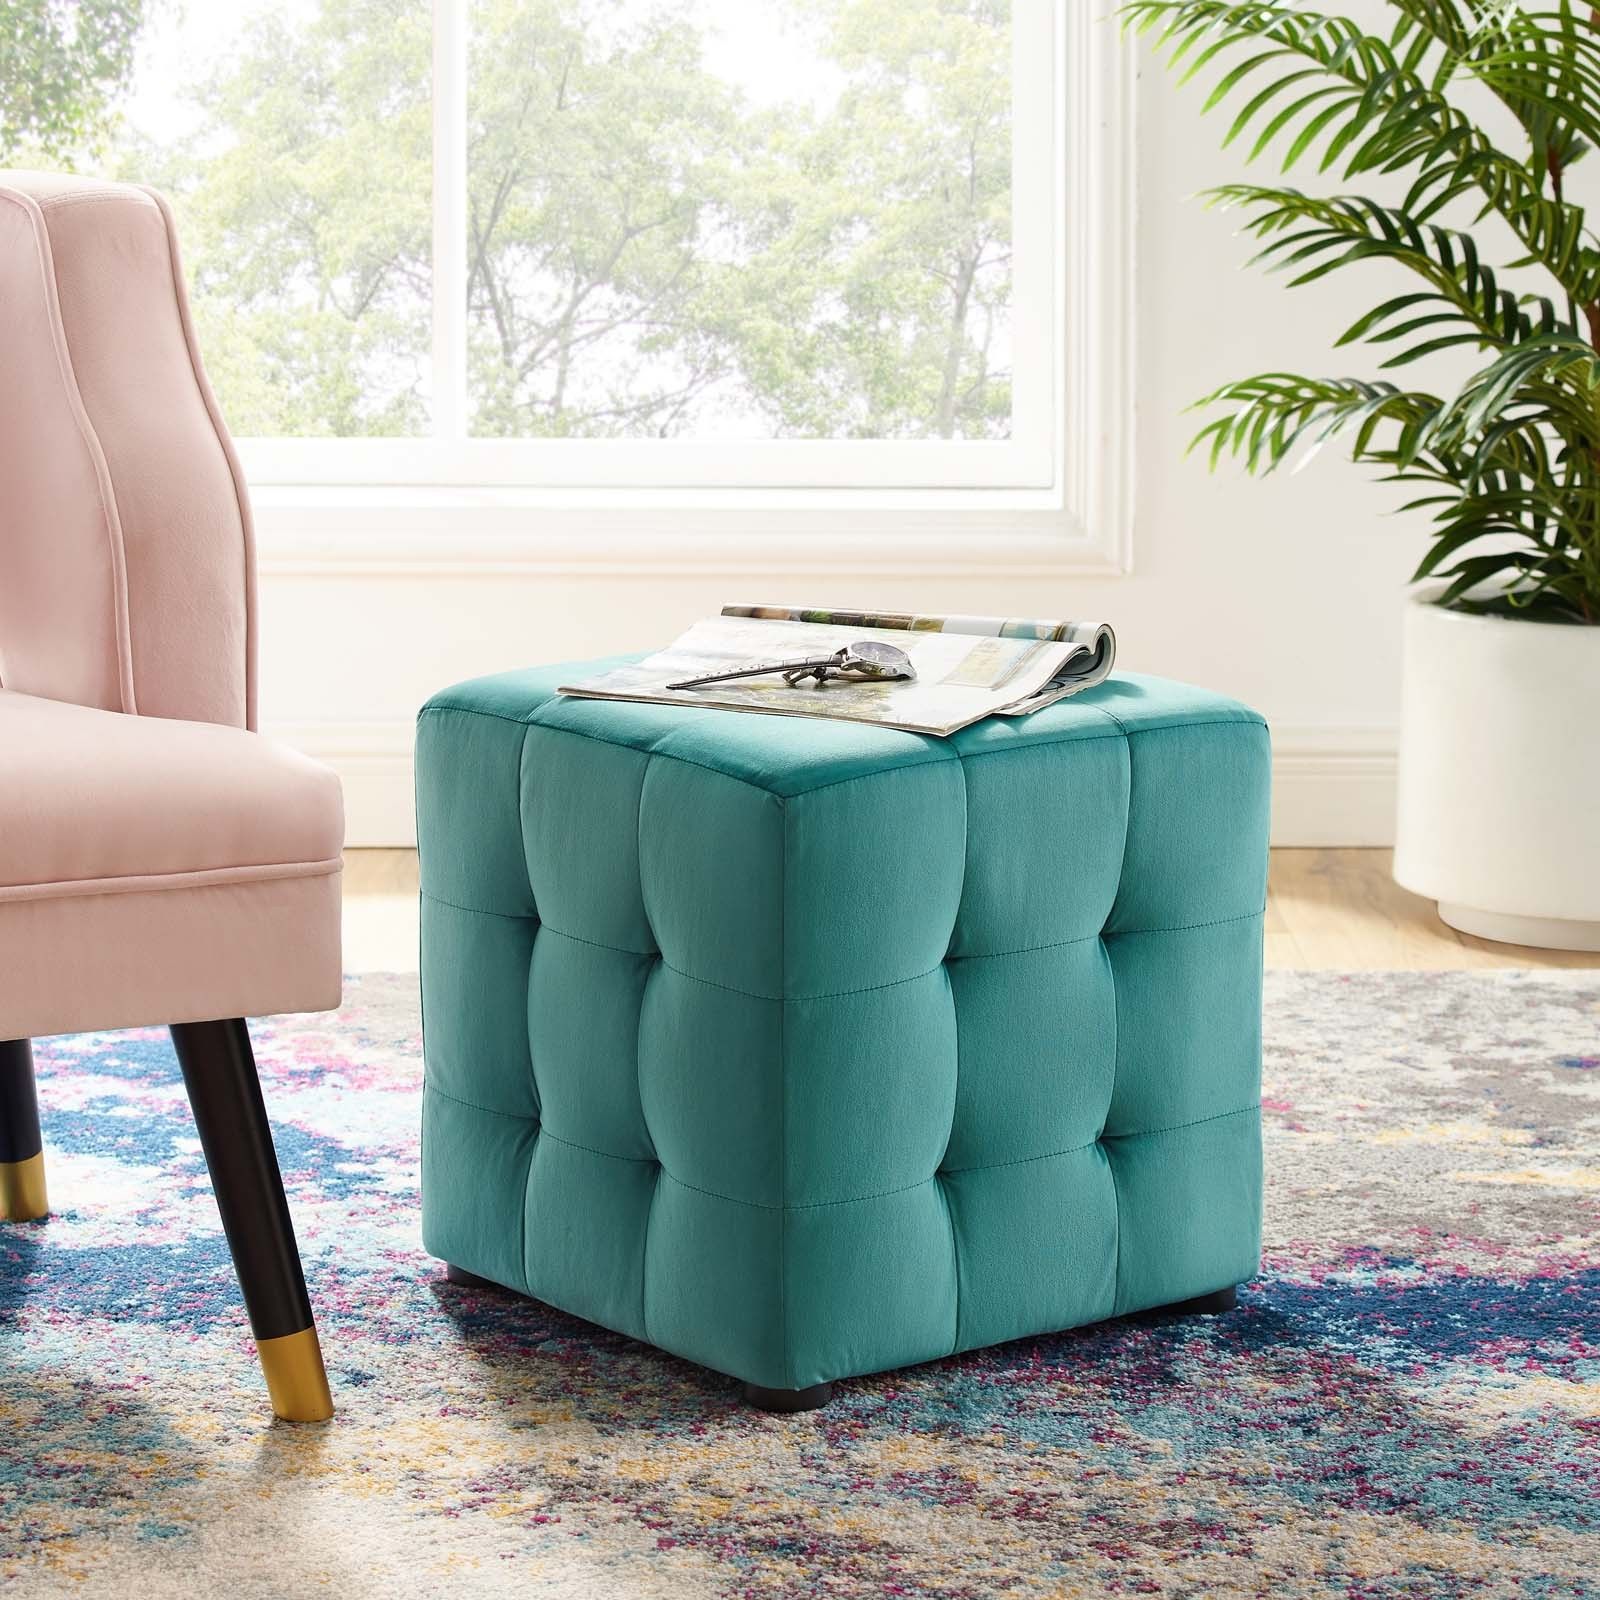 Contour Teal Tufted Cube Performance Velvet Ottoman Eei 3577 Tea Throughout Navy And Light Gray Woven Pouf Ottomans (View 8 of 20)